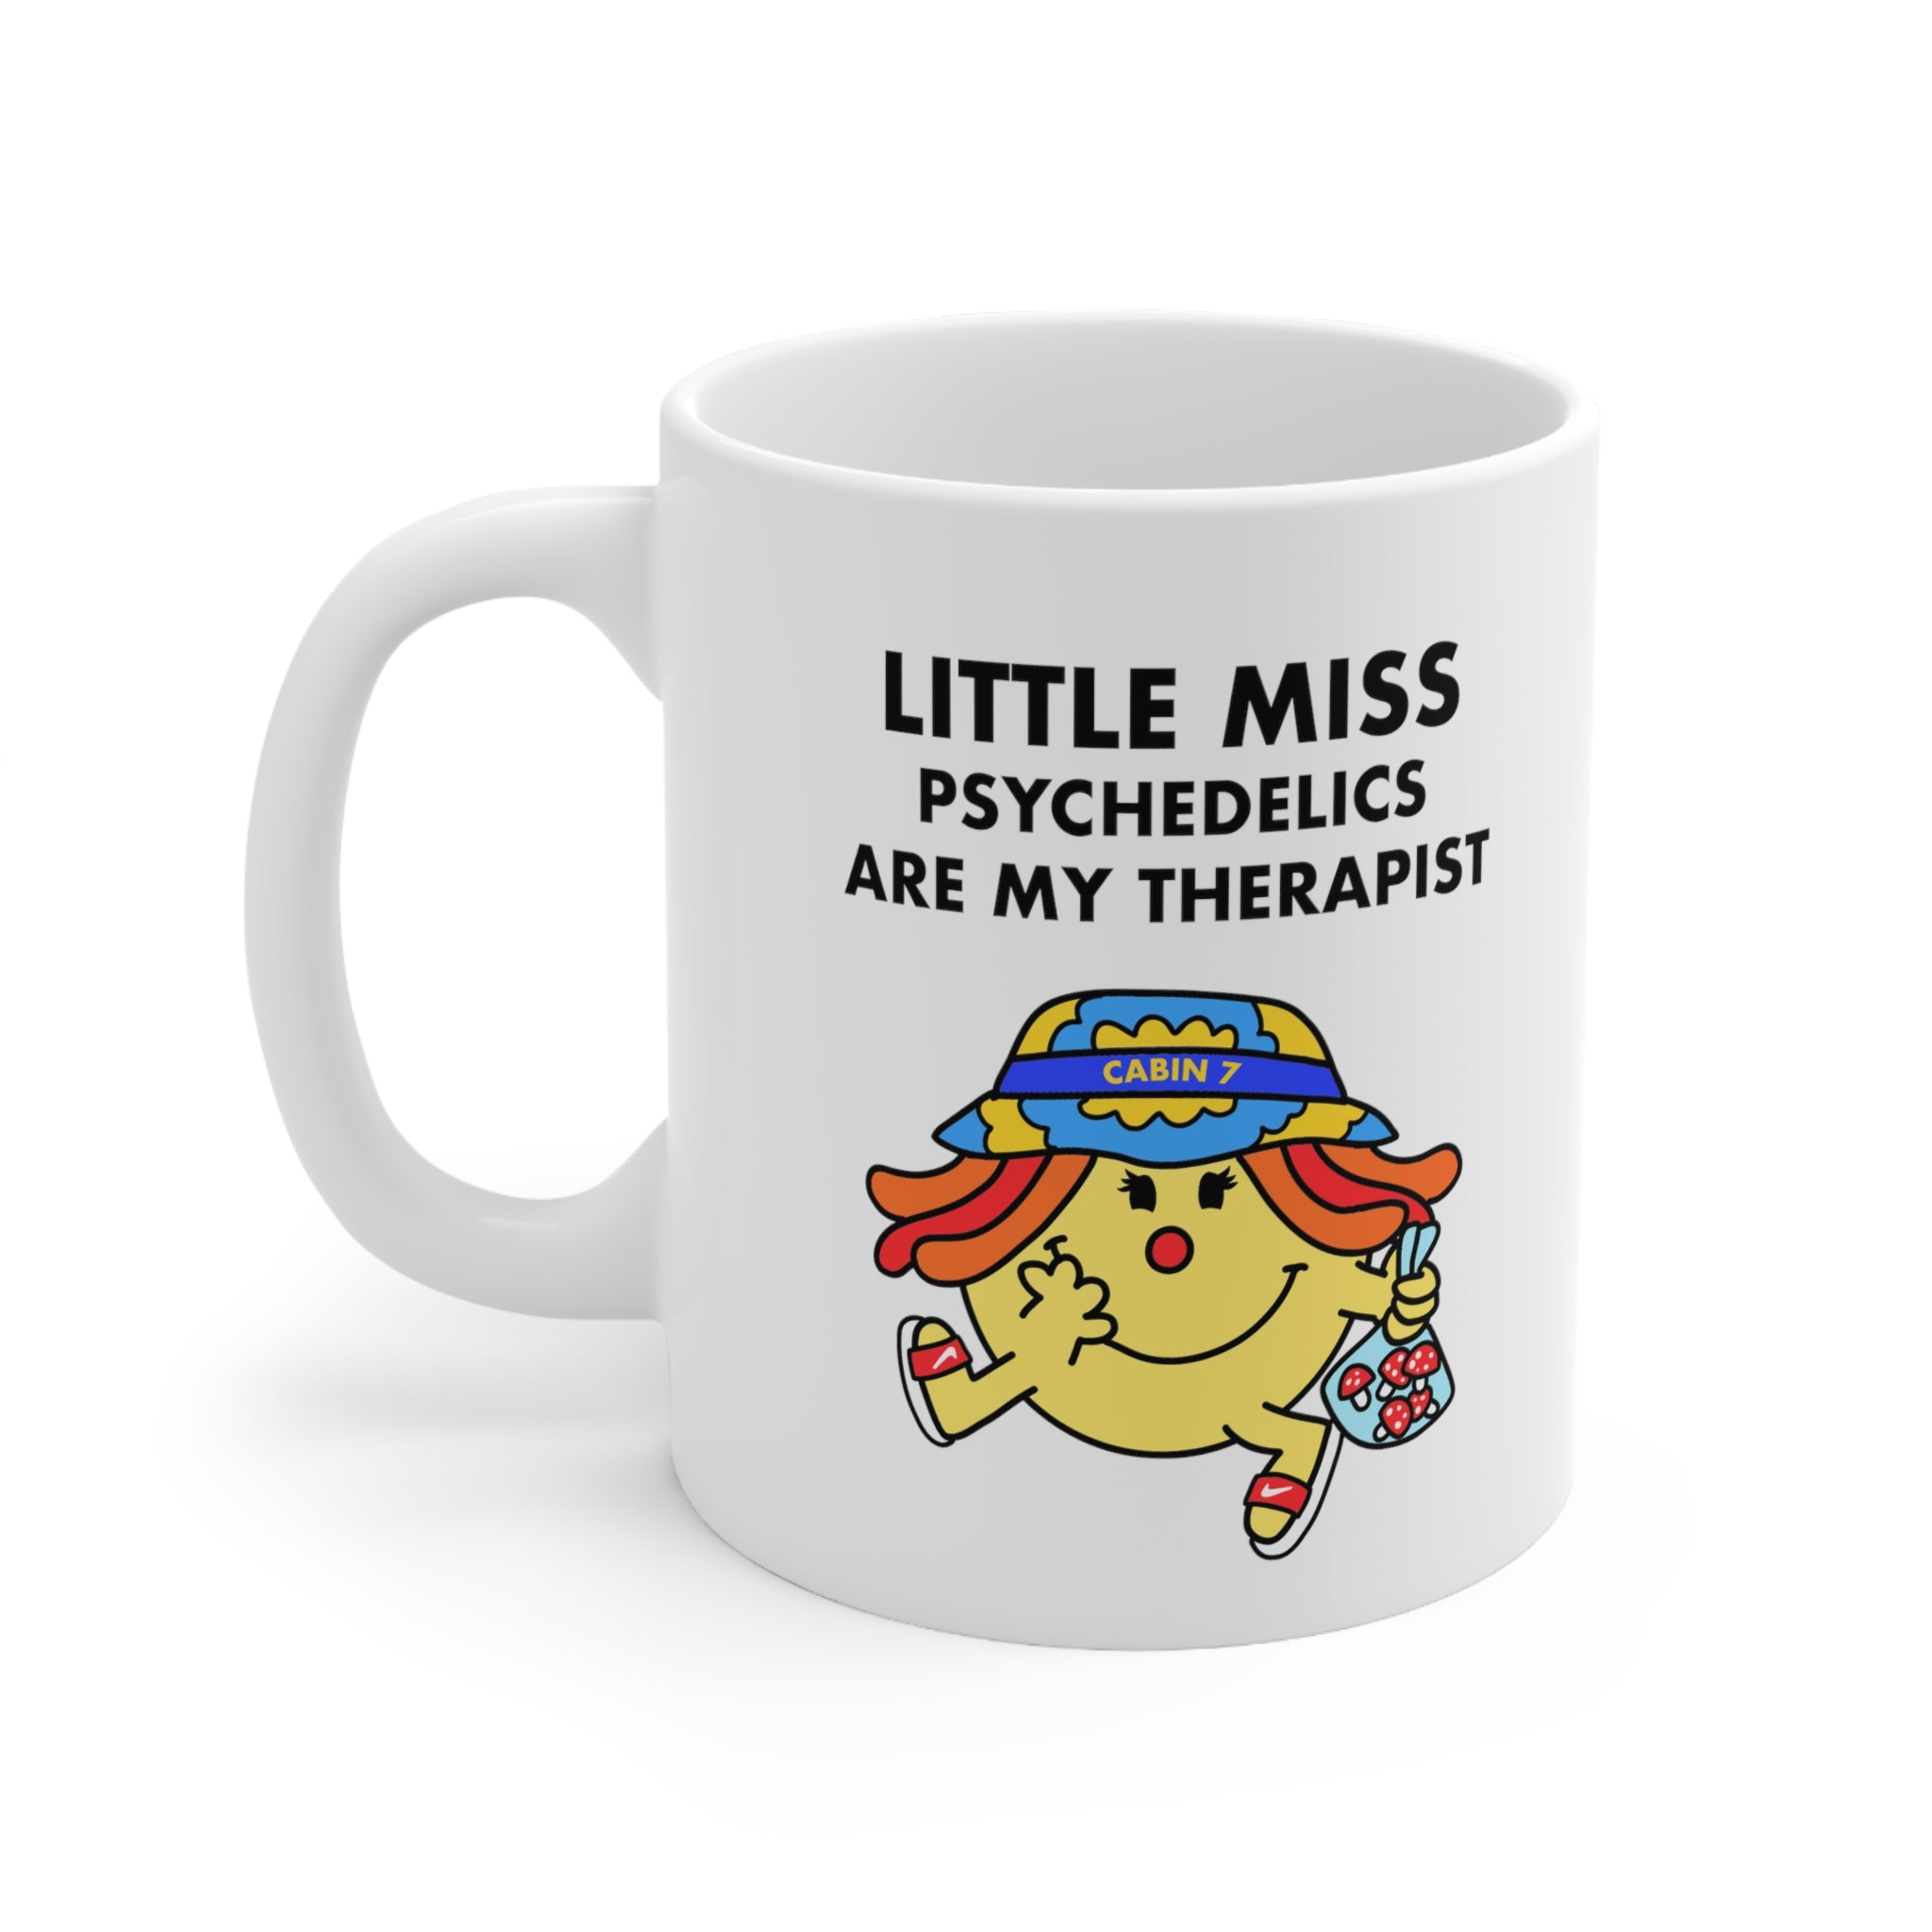 Little Miss Psychedelic Therapy Mug